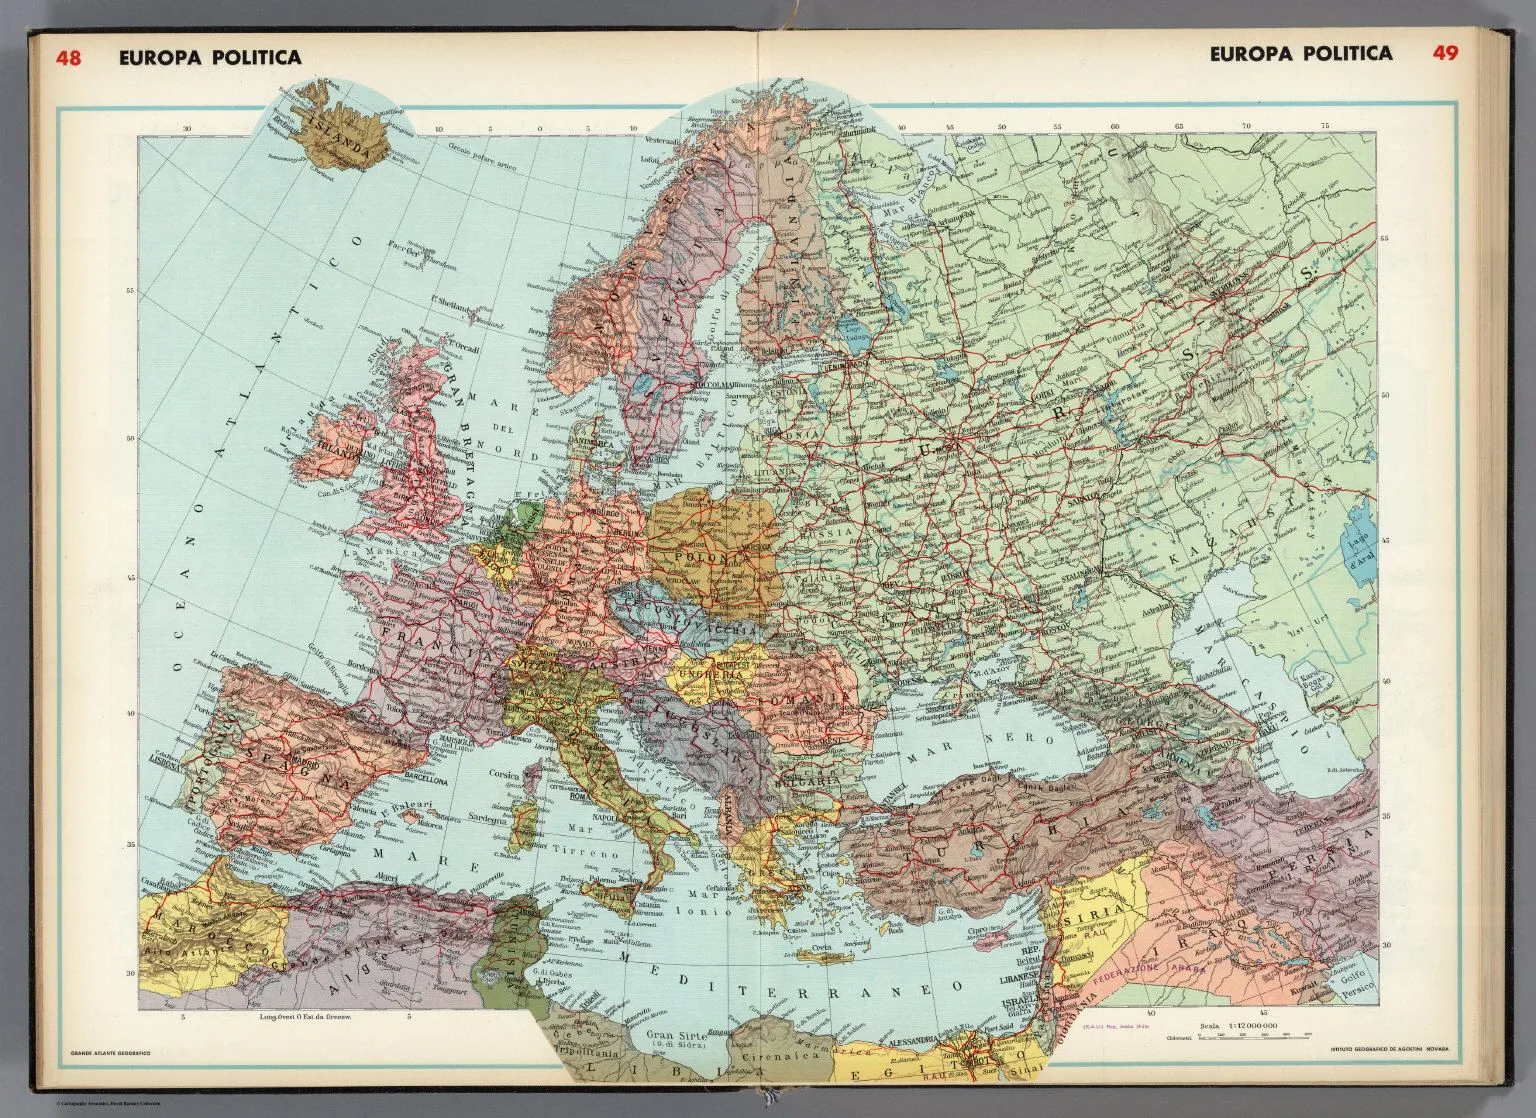 Europa Politica. - David Rumsey Historical Map Collection